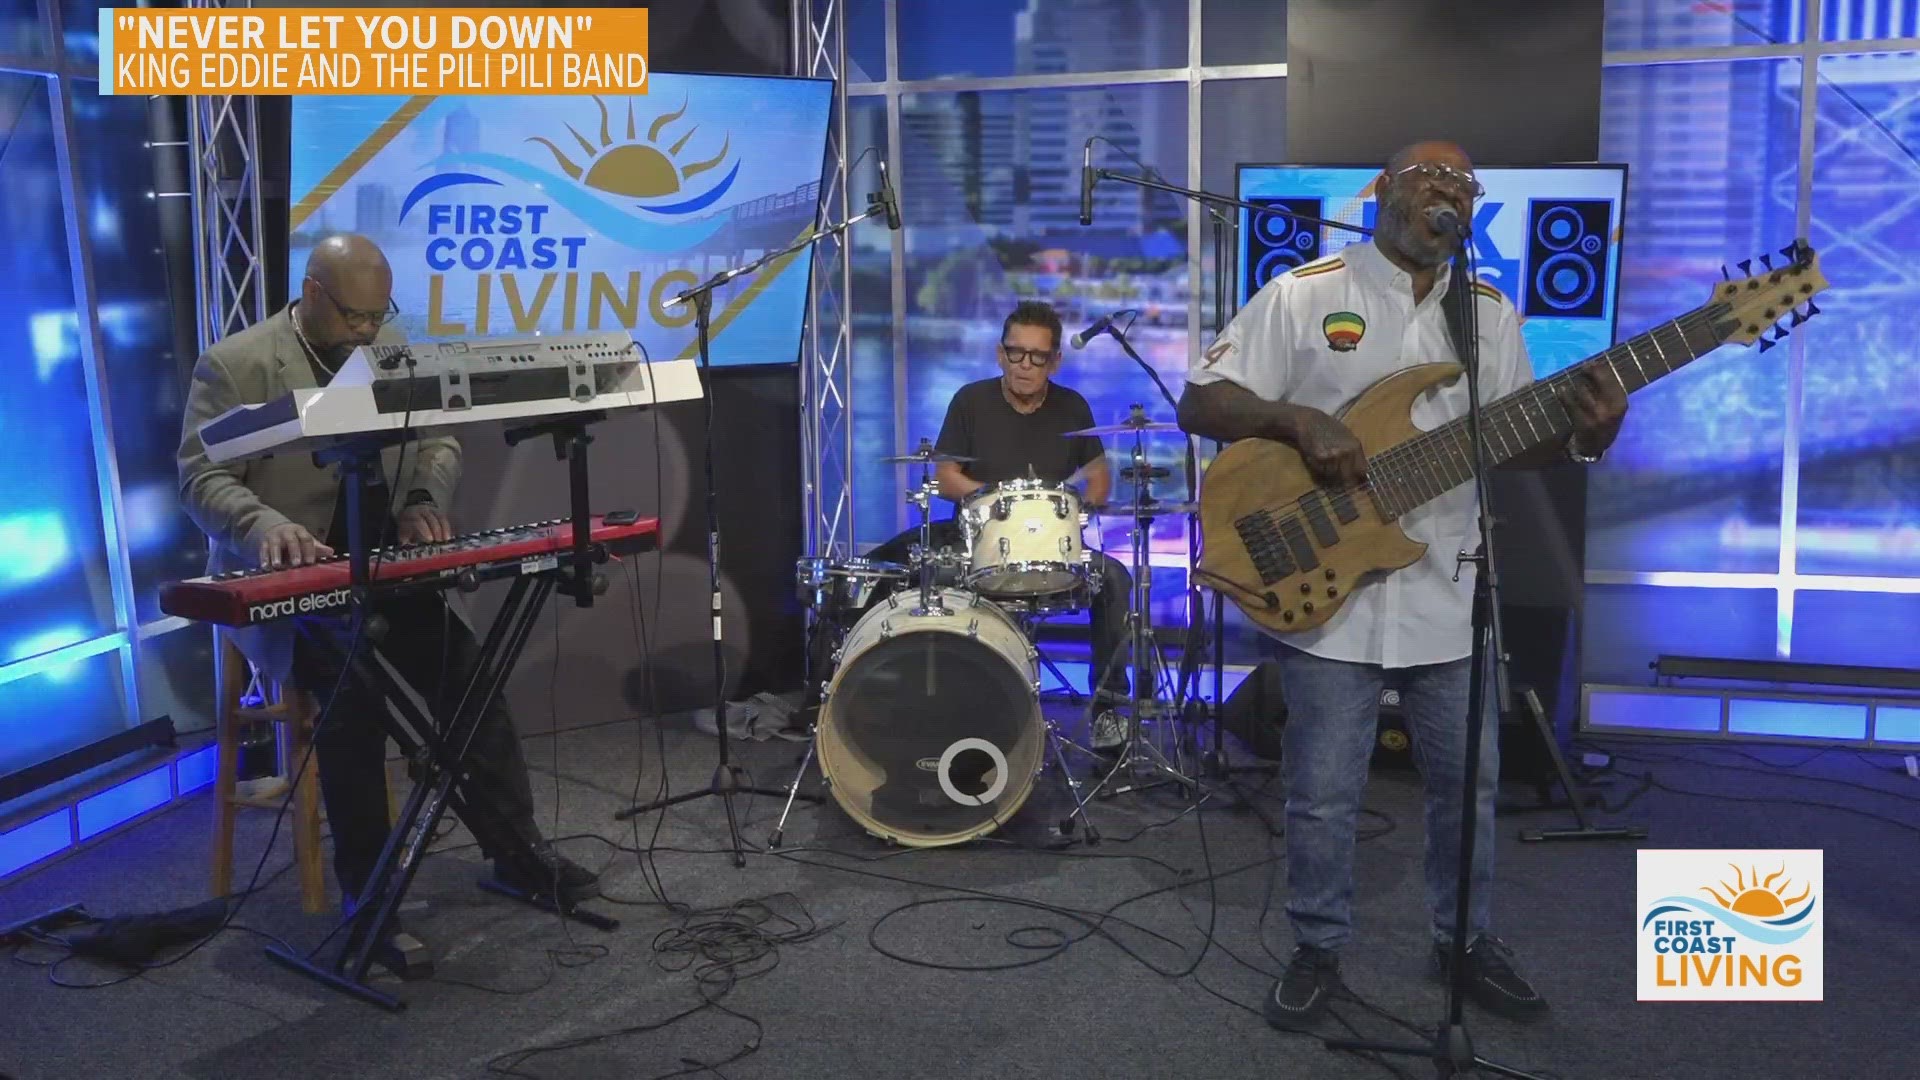 King Eddie and the Pili Pili Band perform 'Never Let You Down'